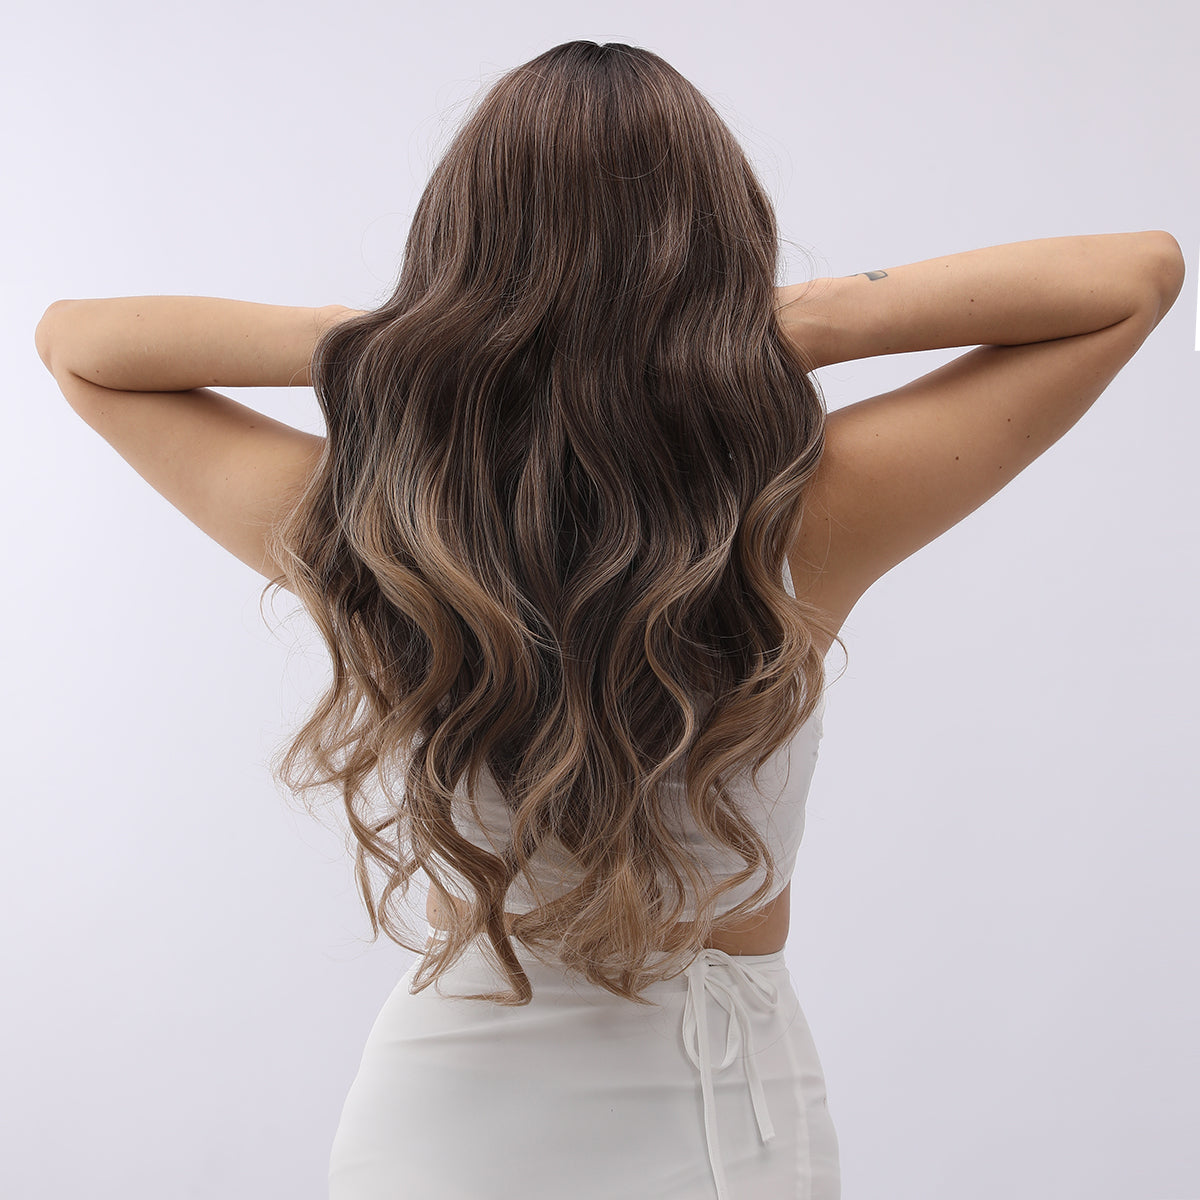 [Hazel Hues] 28-inch Ombre Brown Loose Wave without Bangs (Synthetic Lace Front Wig)